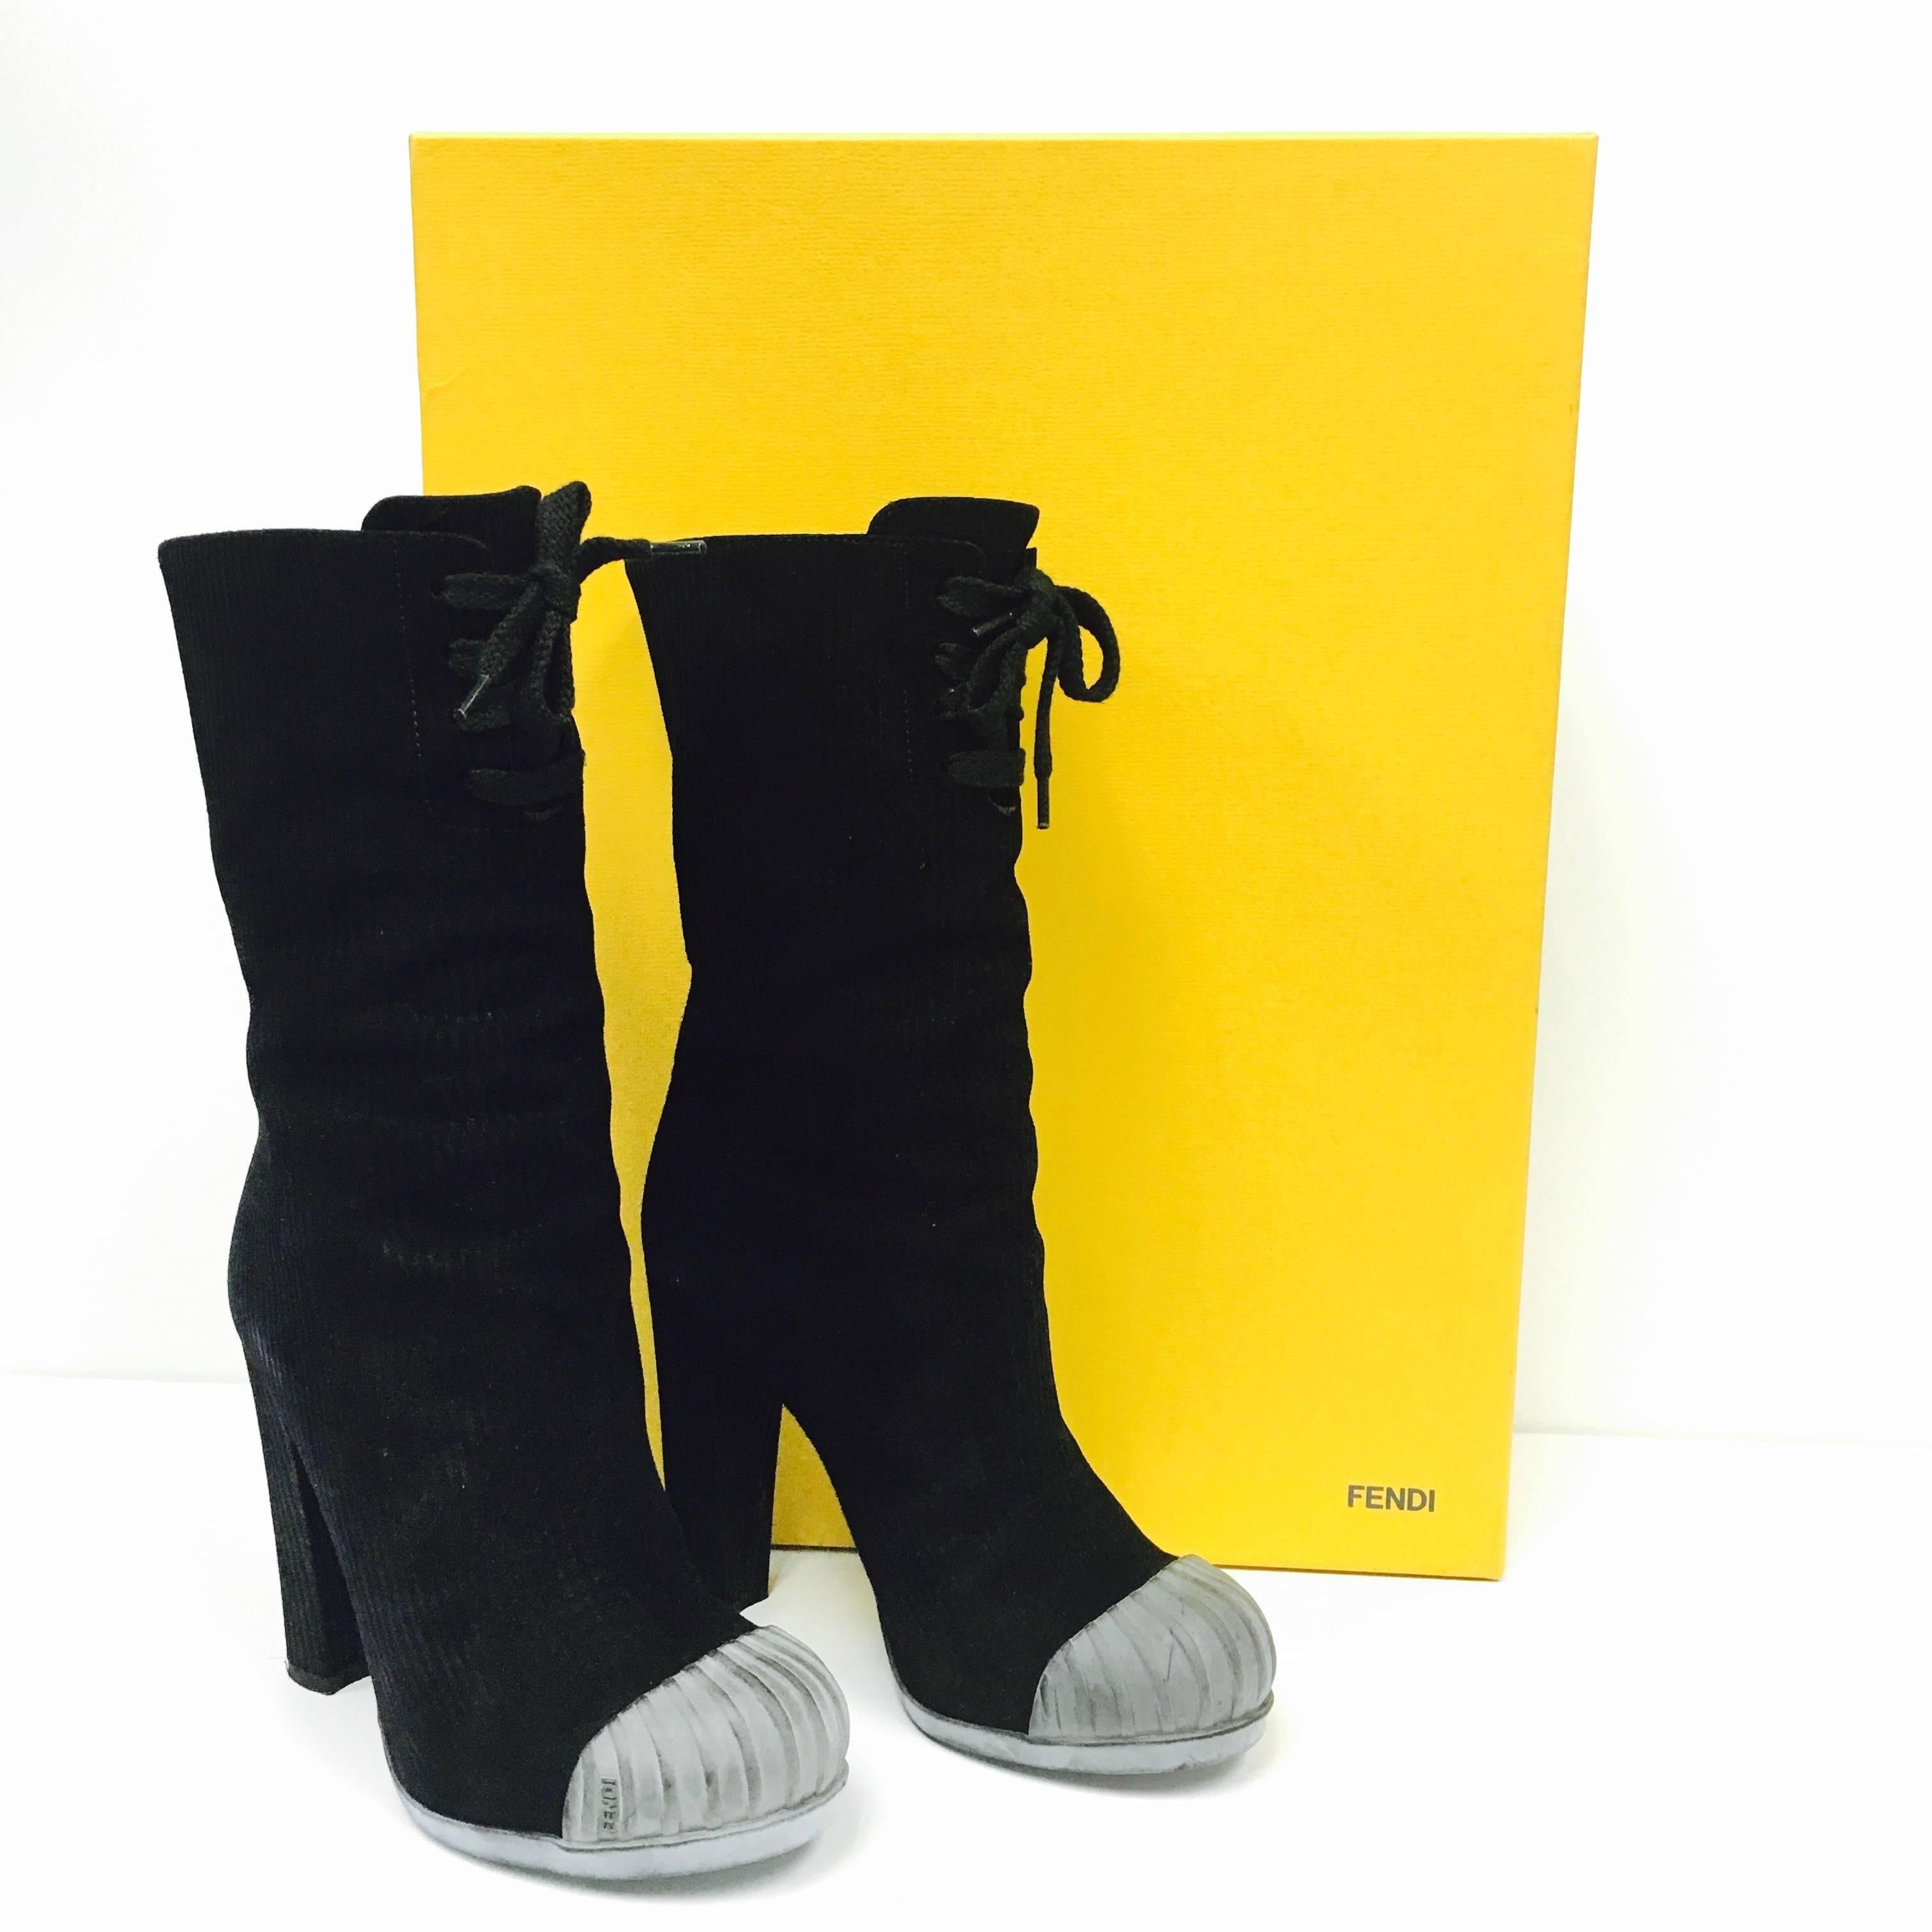 Fendi Fendishire Mid-Shaft Suede Rubber Cap Boots
Size 35​ ITA / 5 US
LIKE NEW. WORN ONCE. ORIGINAL BOX, EXTRA HEEL CAPS.
Retail: $990. Sold out. 
Black Fendi corduroy boots with rubber cap-toe and embossed logo on side,
tie closure at front